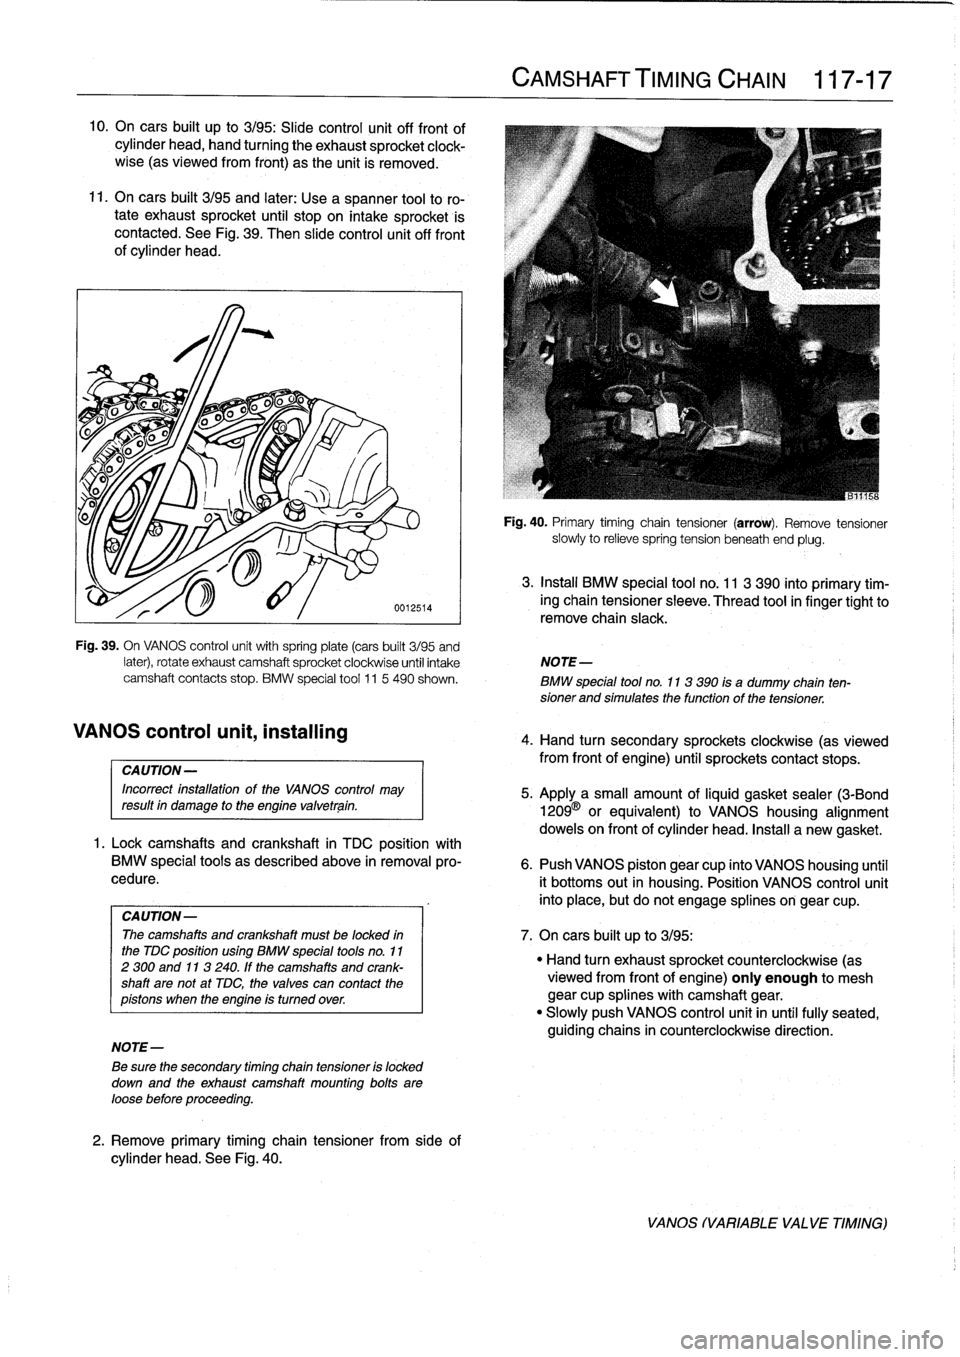 BMW M3 1993 E36 Service Manual 10
.
On
cars
built
up
to
3/95
:
Slide
control
unit
off
front
of
cylinder
head,
hand
turning
the
exhaust
sprocket
clock-
wise
(as
viewedfrom
front)
as
the
unit
is
removed
.

11
.
On
cars
built
3/95
and